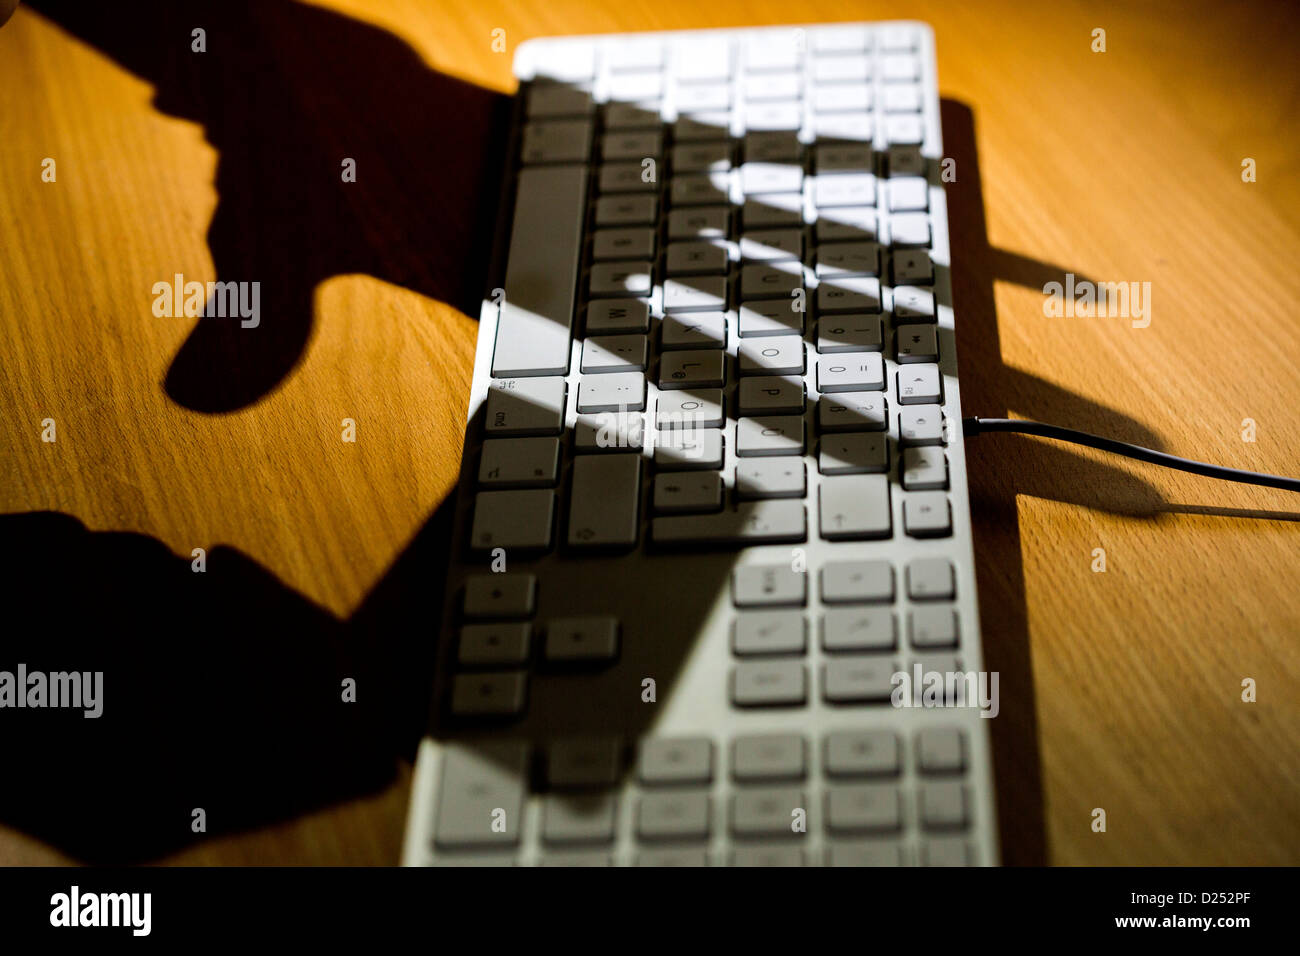 Use of a credit card in the Internet, typing credit card number on a computer keyboard. Stock Photo